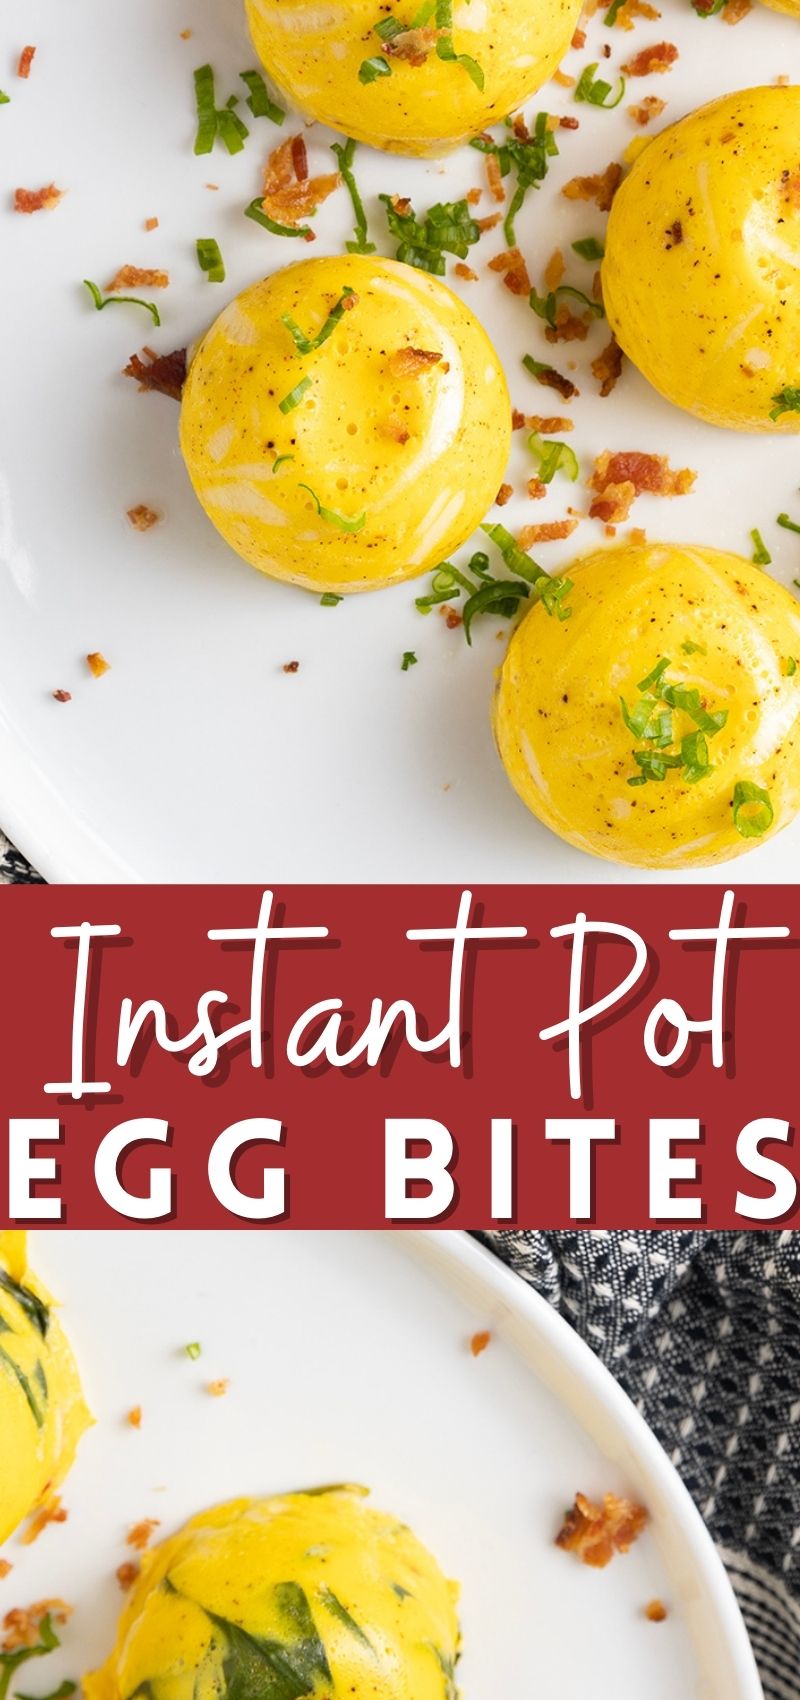 If you love the Starbucks egg bites, but don’t love paying $5 for them, you’re going to flip over these delectable Instant Pot Egg Bites. For a little over the price of one order, you can make a dozen egg bites instant pot style at home!